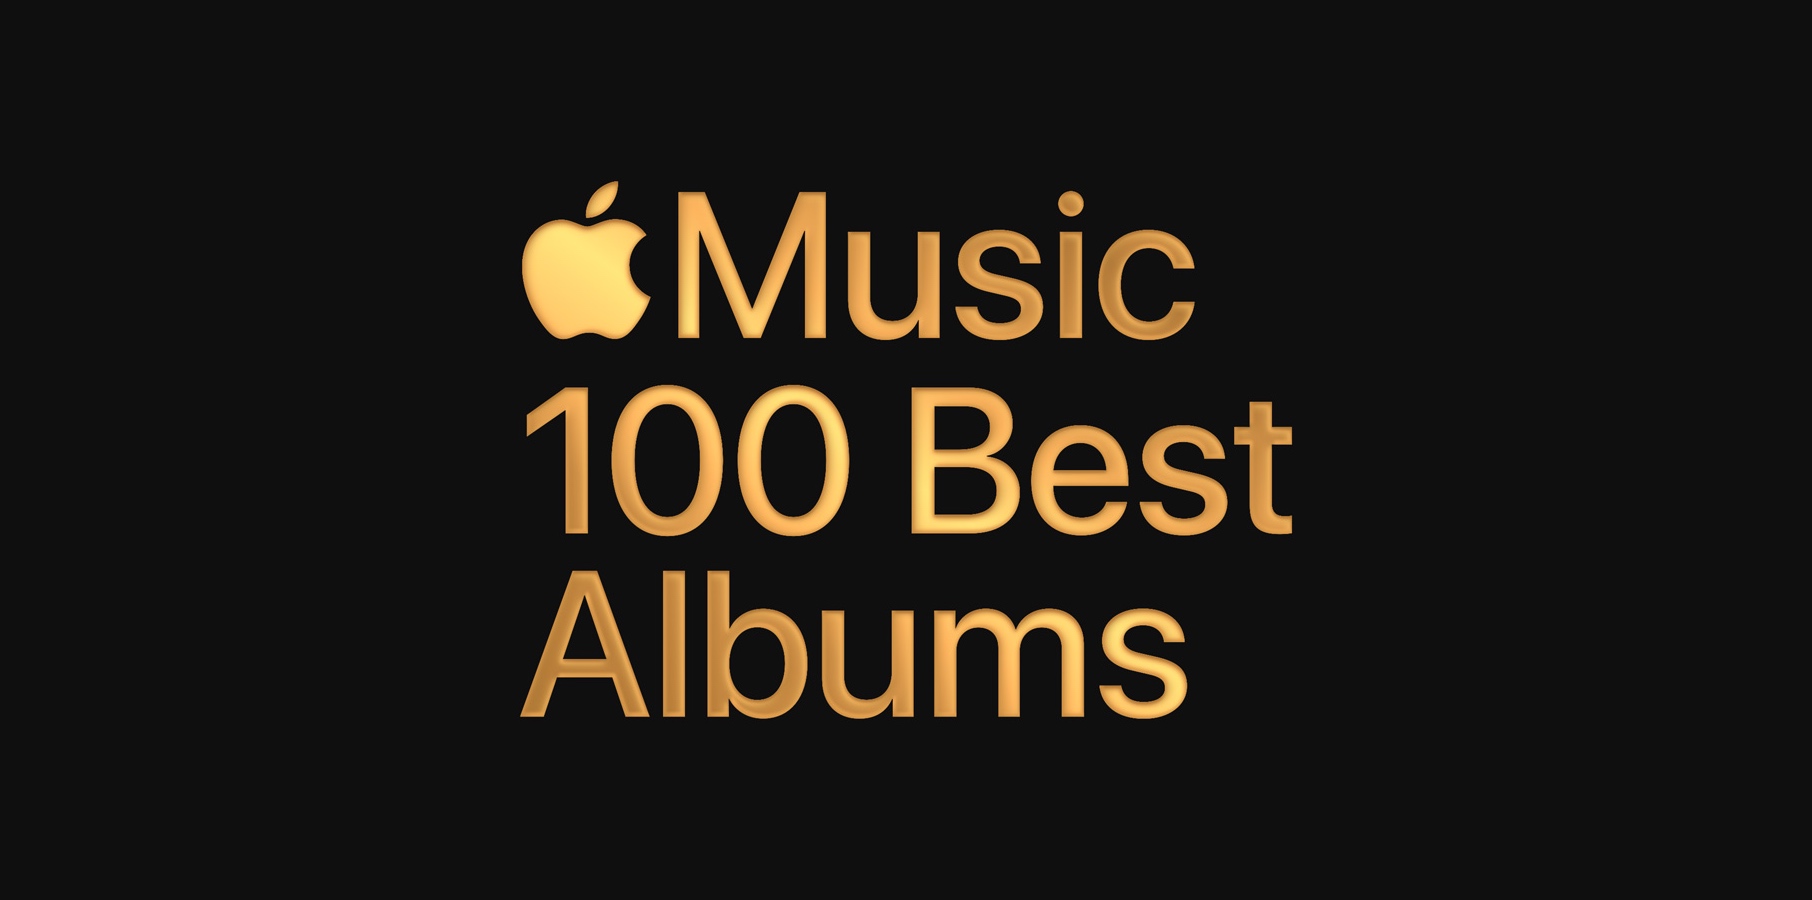 Apple Music announces 100 best albums of all time